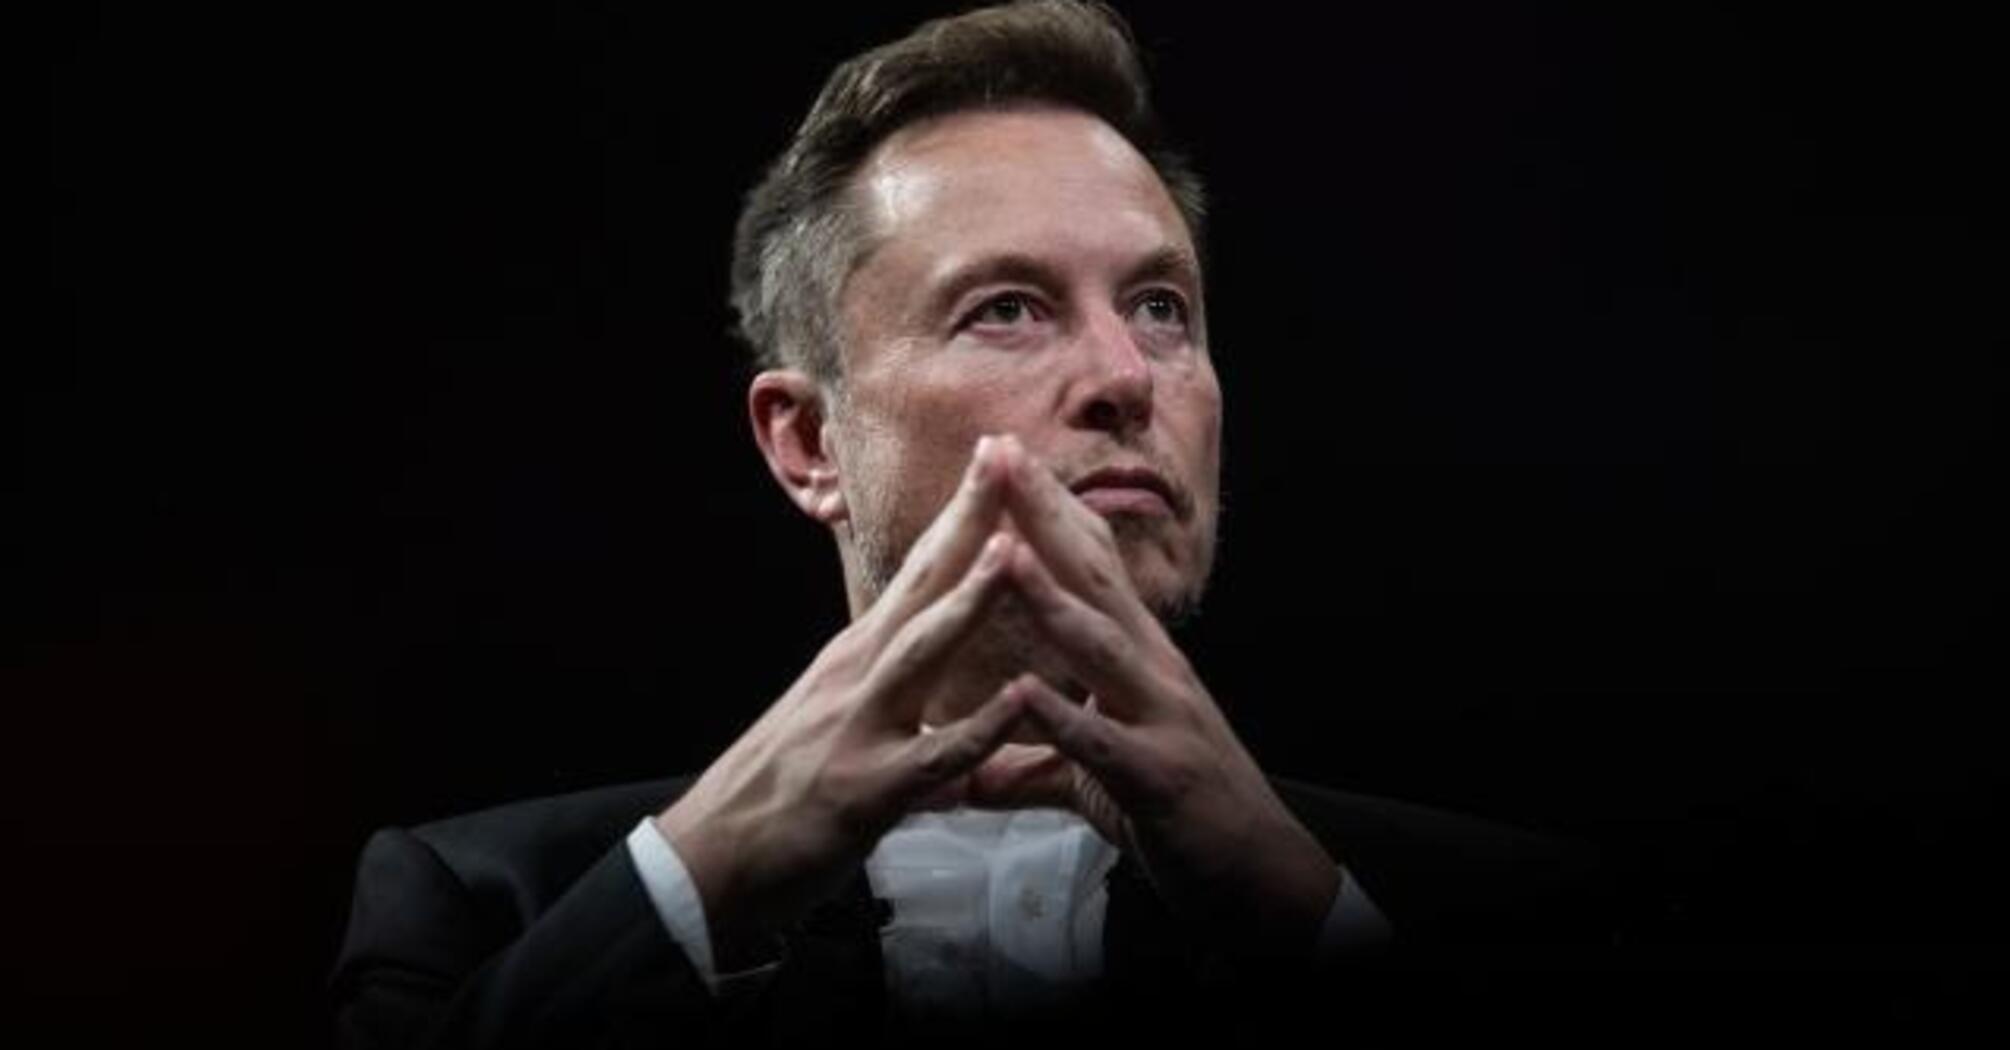 Four tips from Elon Musk